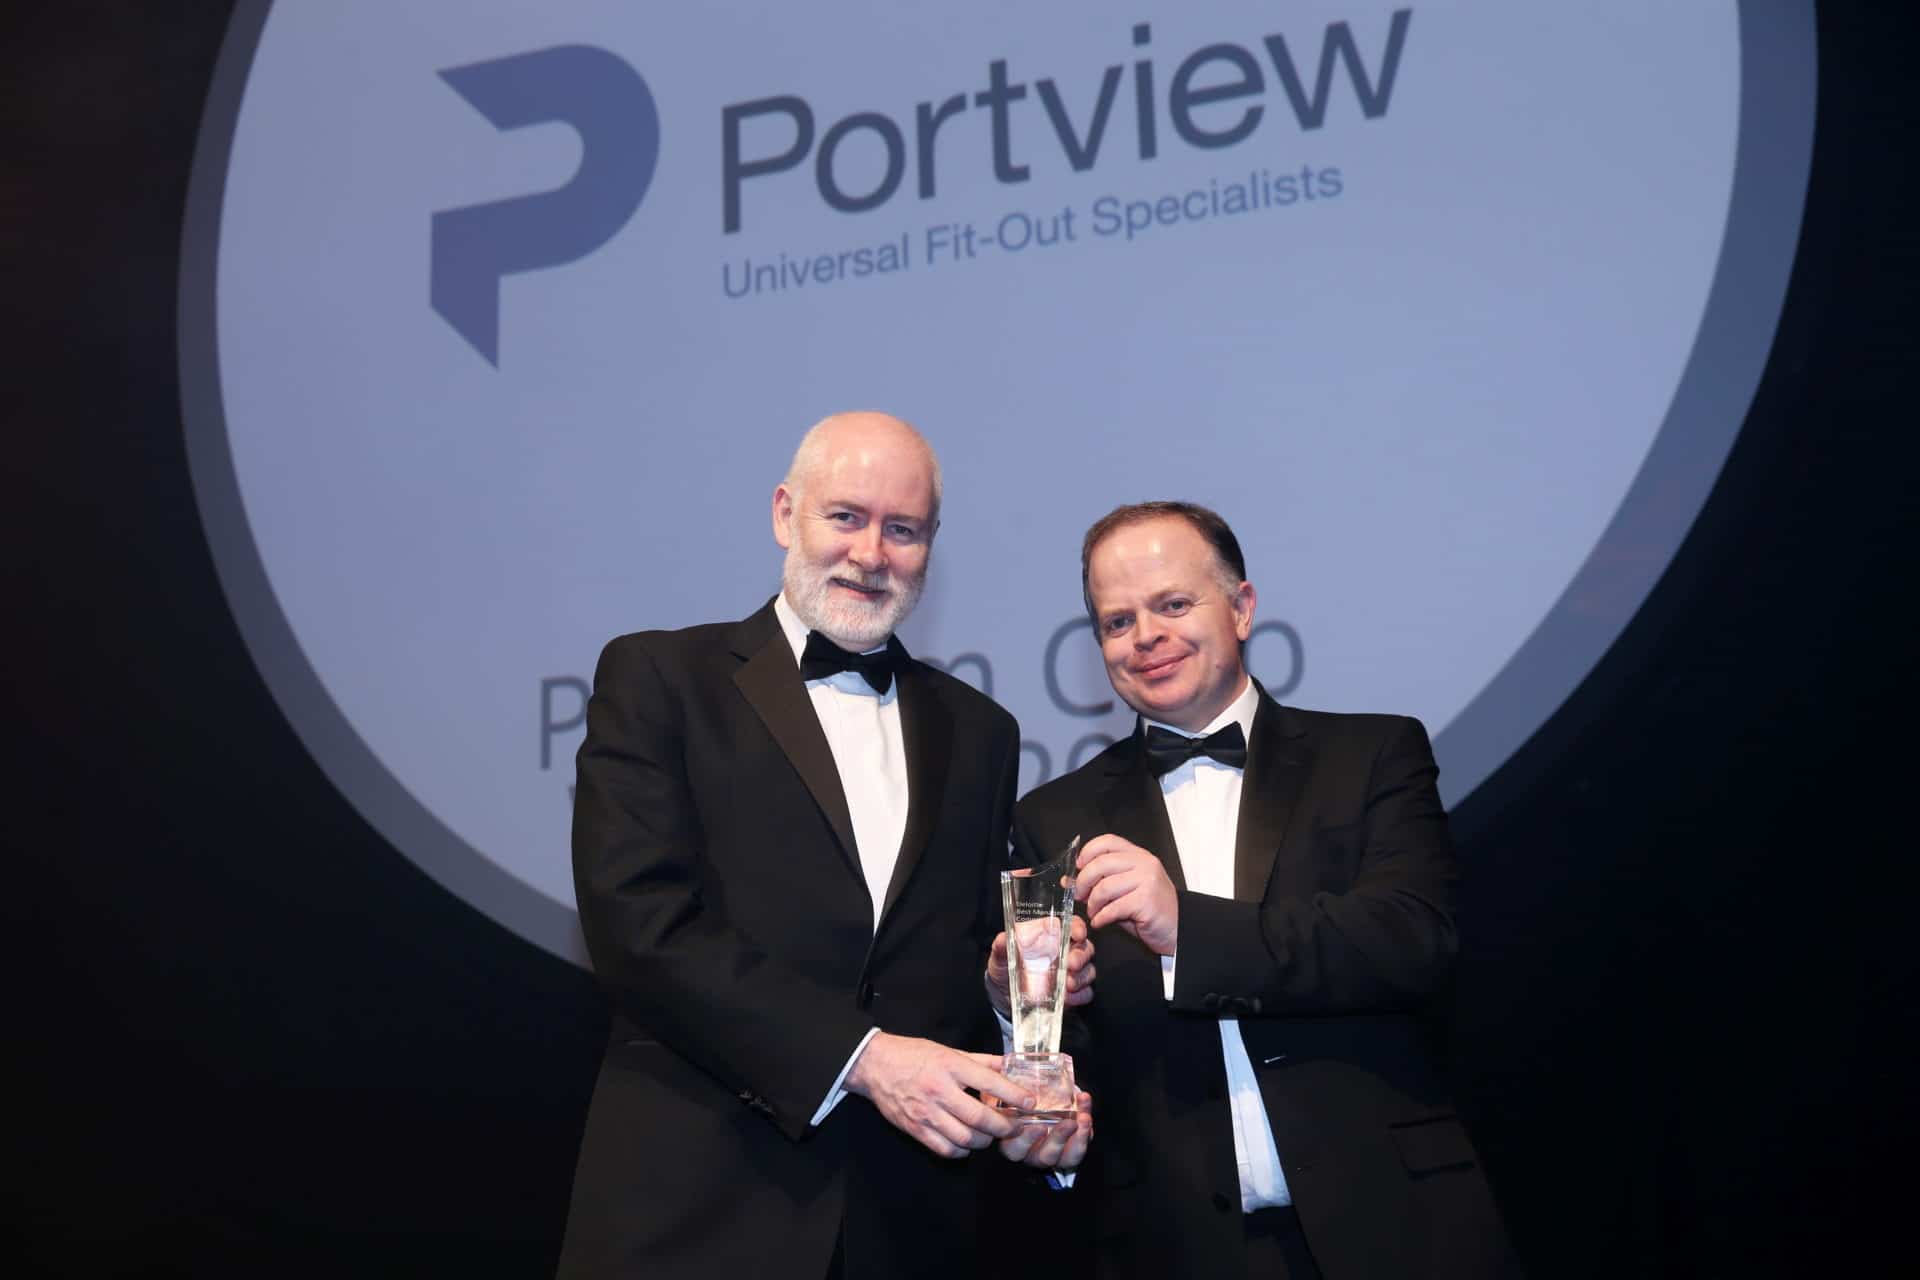 Portview Fit-Out recognised for business excellence and talent management